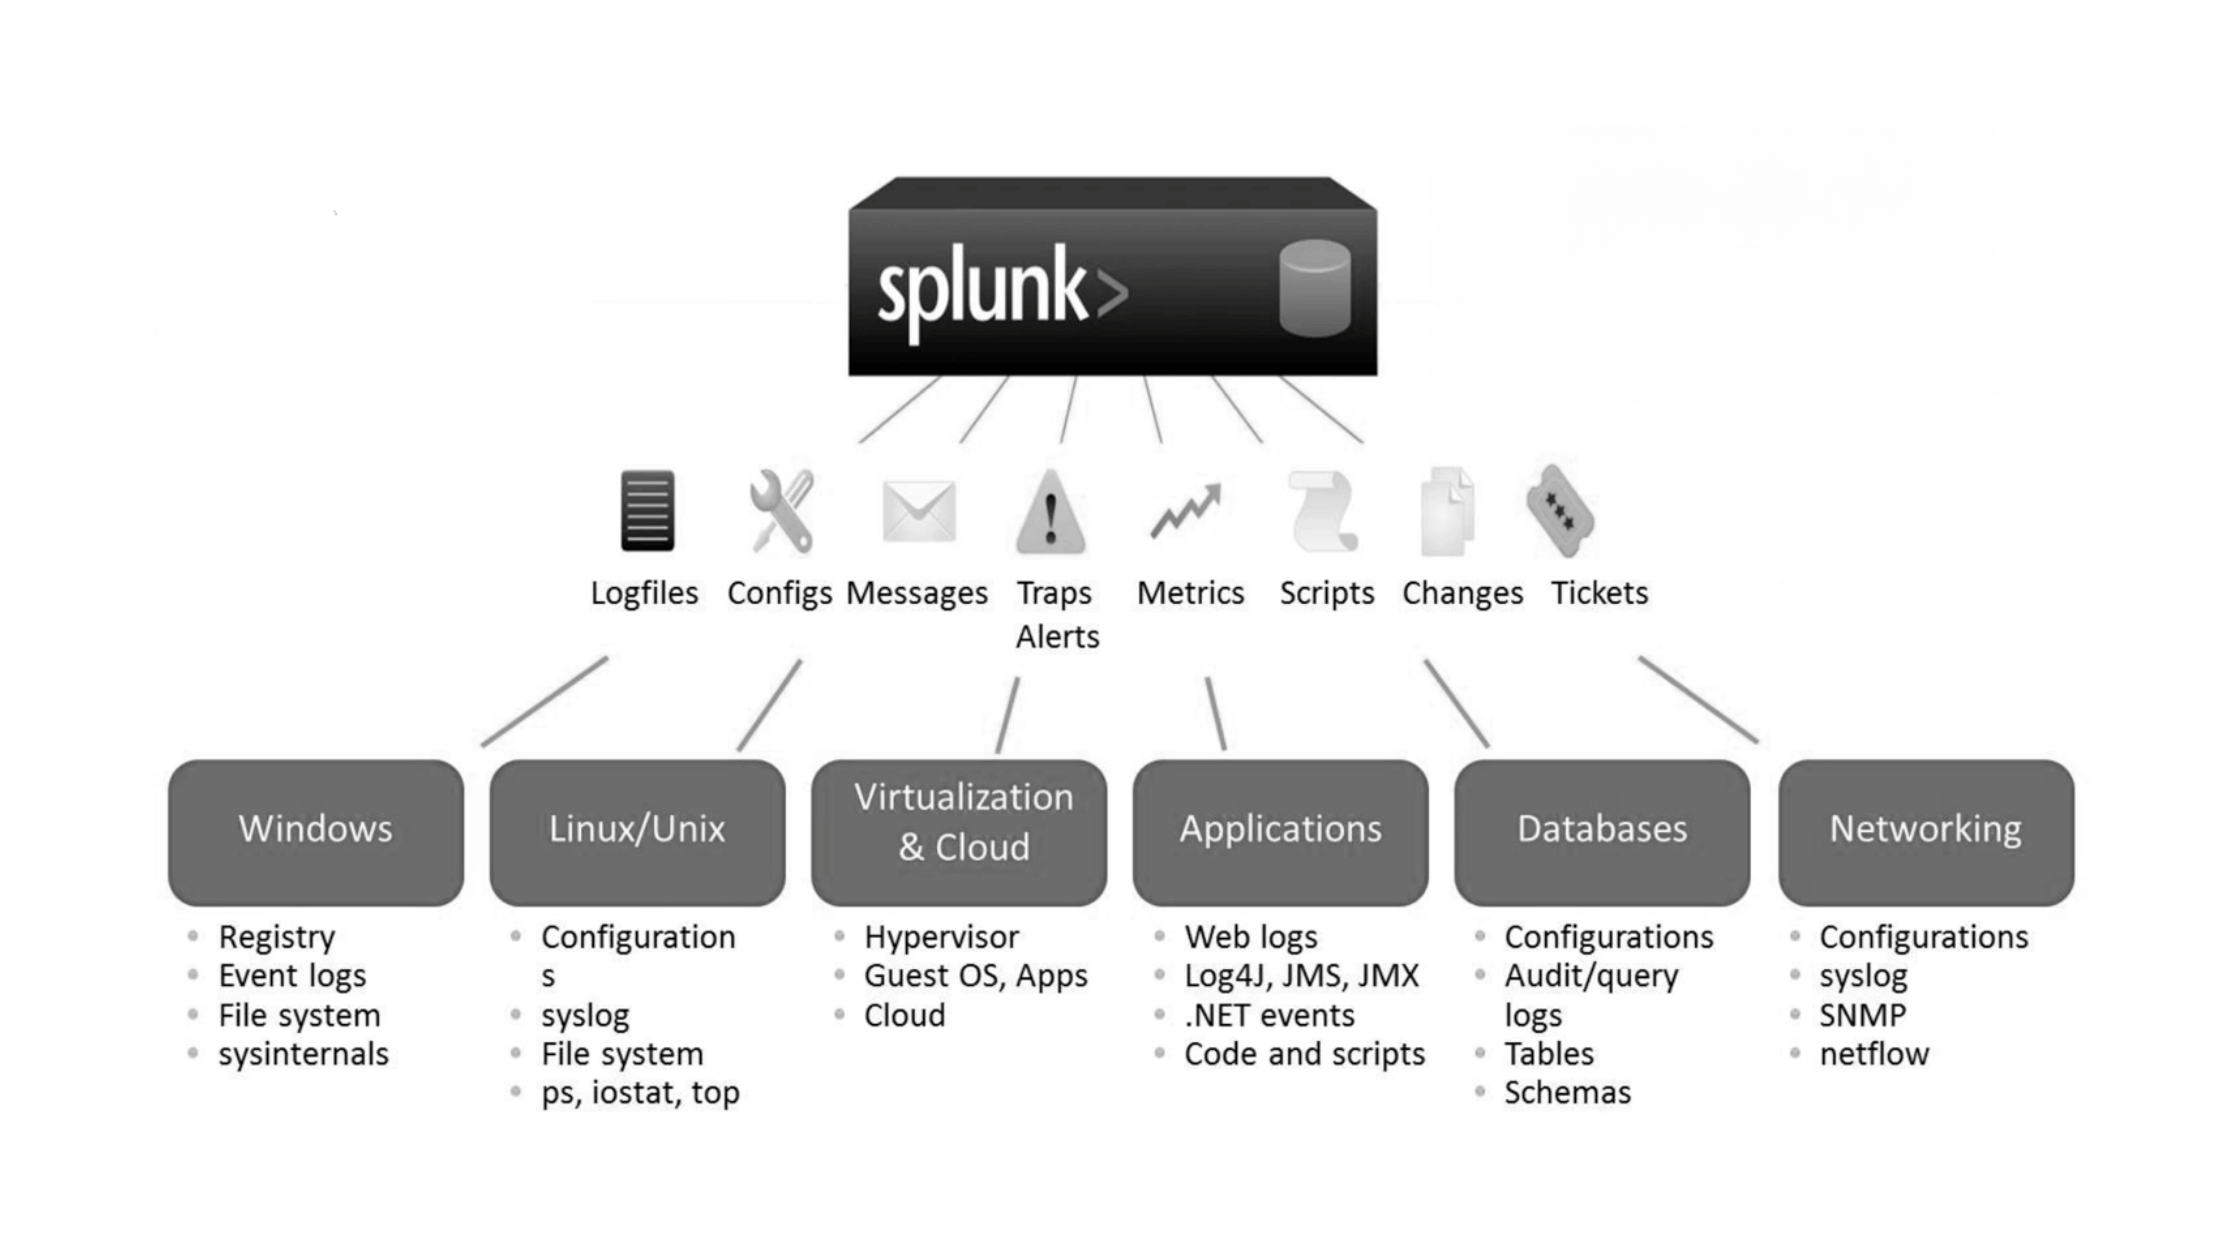 An infographic showcasing how Splunk integrates with various IT environments, collecting and analyzing data from Windows, Linux/Unix, Virtualization & Cloud, Applications, Databases, and Networking.